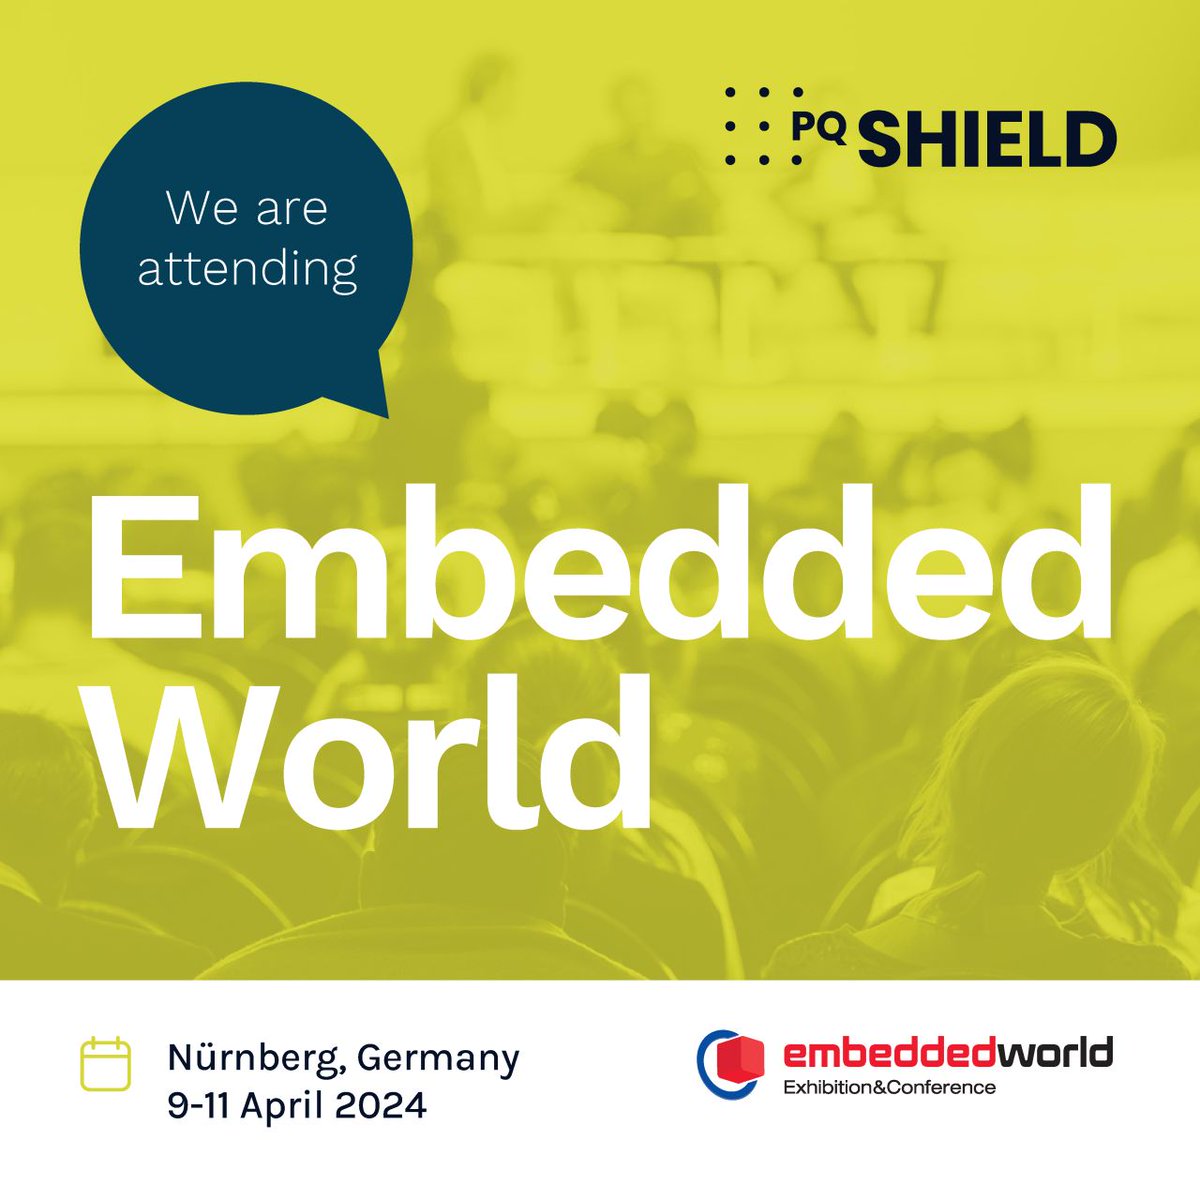 Our Sales Director Europe Burkhard Jour will be attending Embedded World until the 11th April 2024. We hope to see you in Nürnberg too! #cryptography #cybersecurity